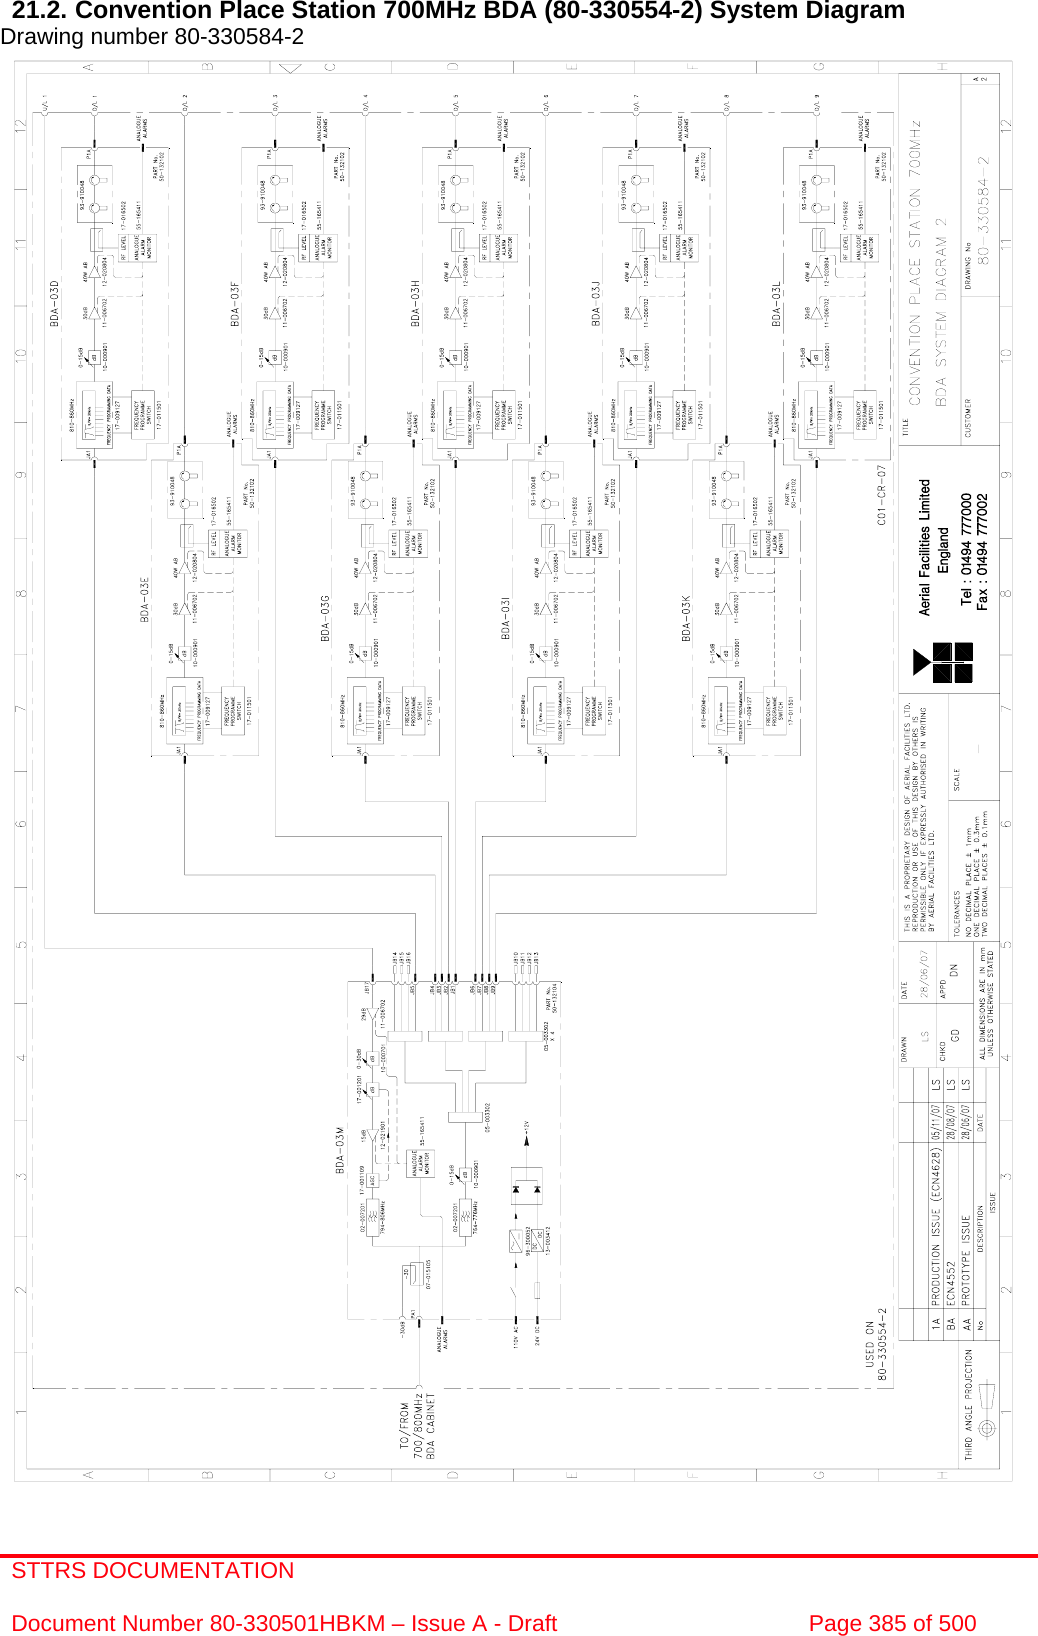 STTRS DOCUMENTATION  Document Number 80-330501HBKM – Issue A - Draft  Page 385 of 500   21.2. Convention Place Station 700MHz BDA (80-330554-2) System Diagram Drawing number 80-330584-2                                                    